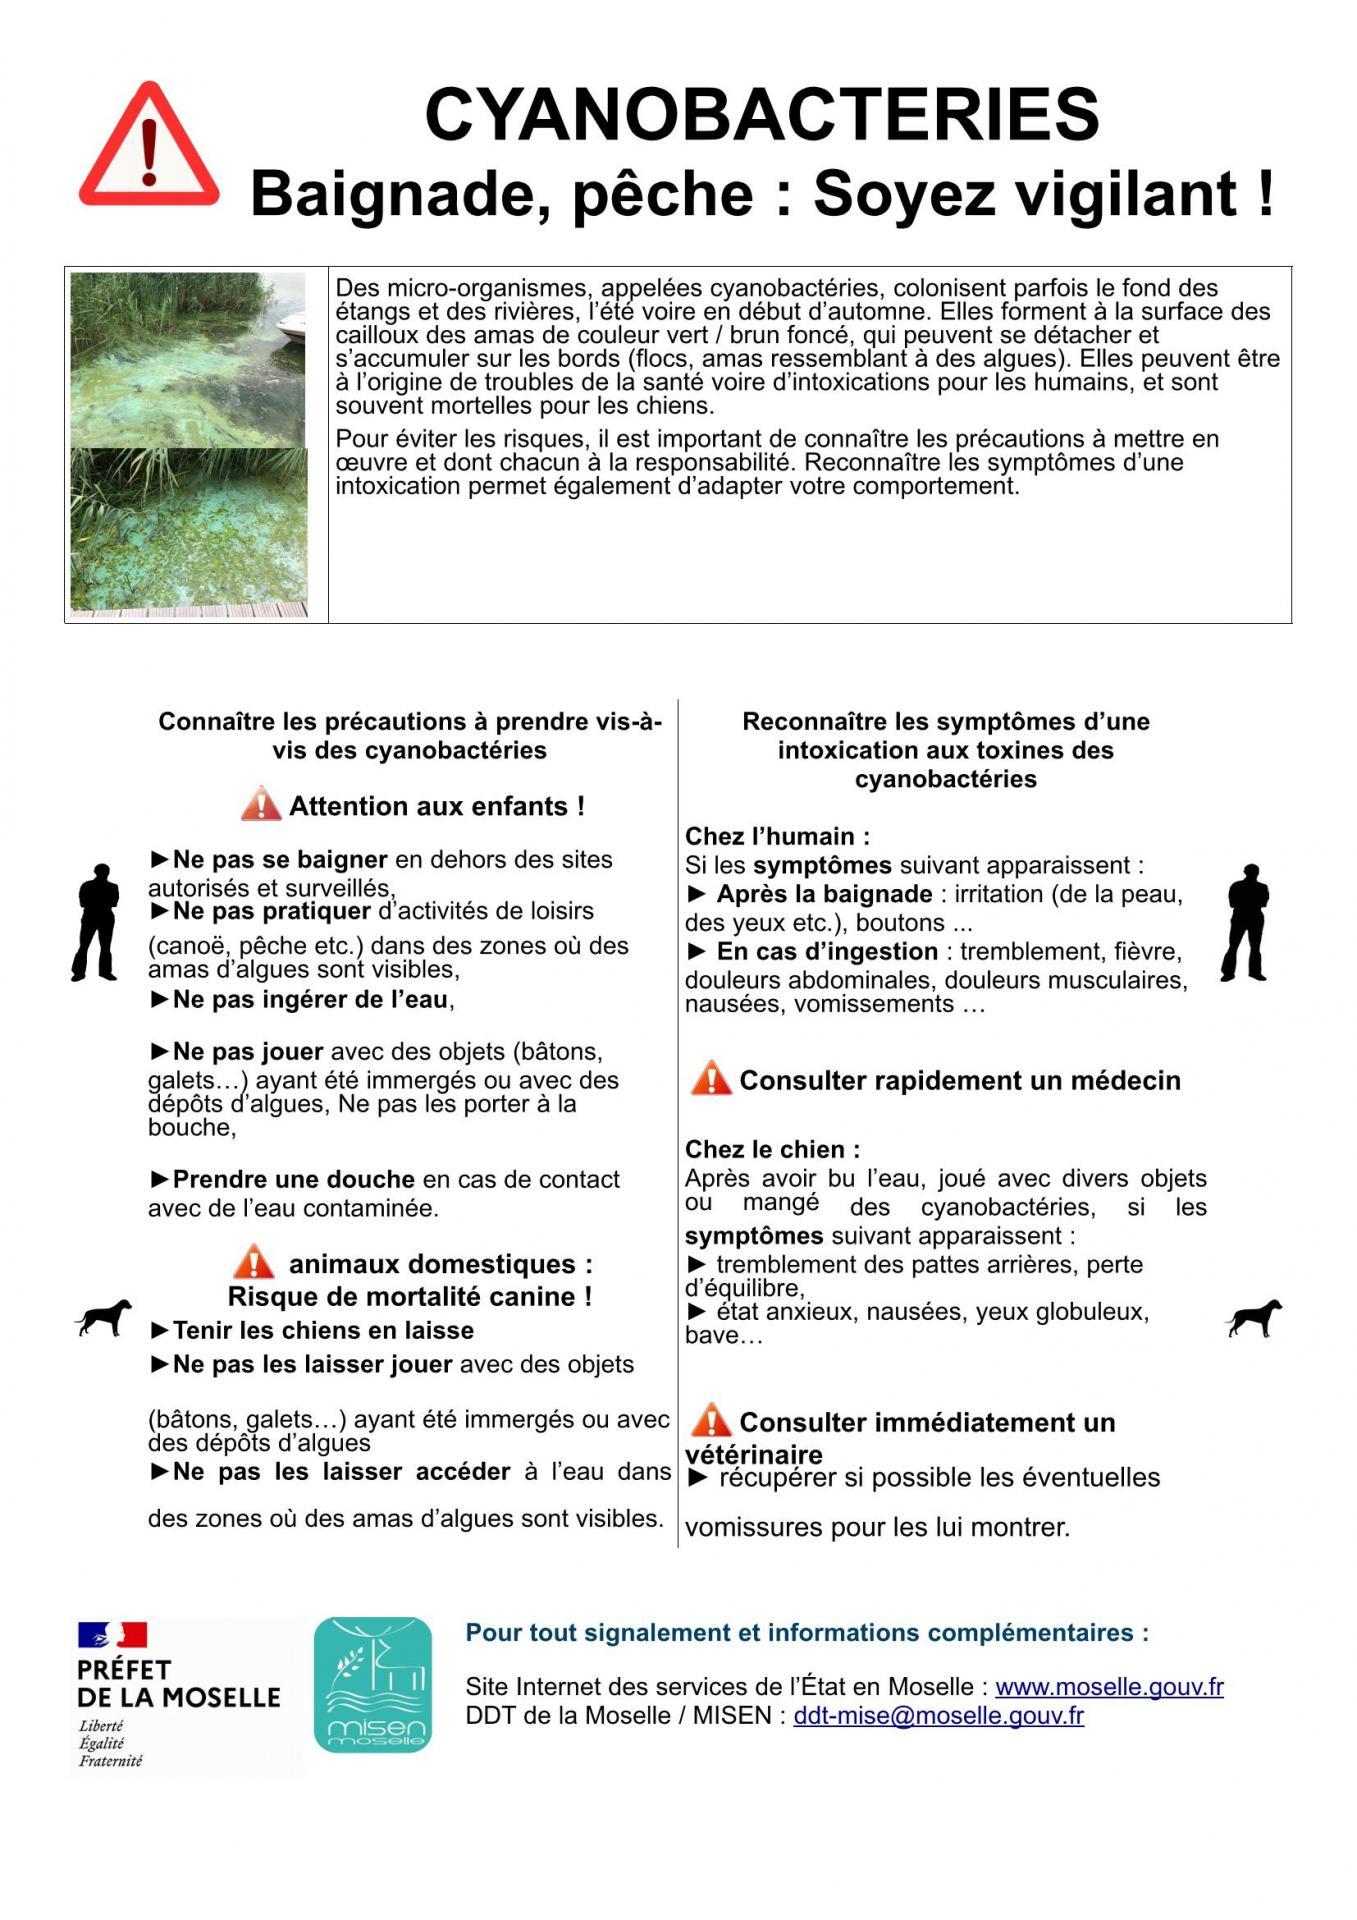 2020 06 29 affiche prevention cyanobacterie v2 page 1